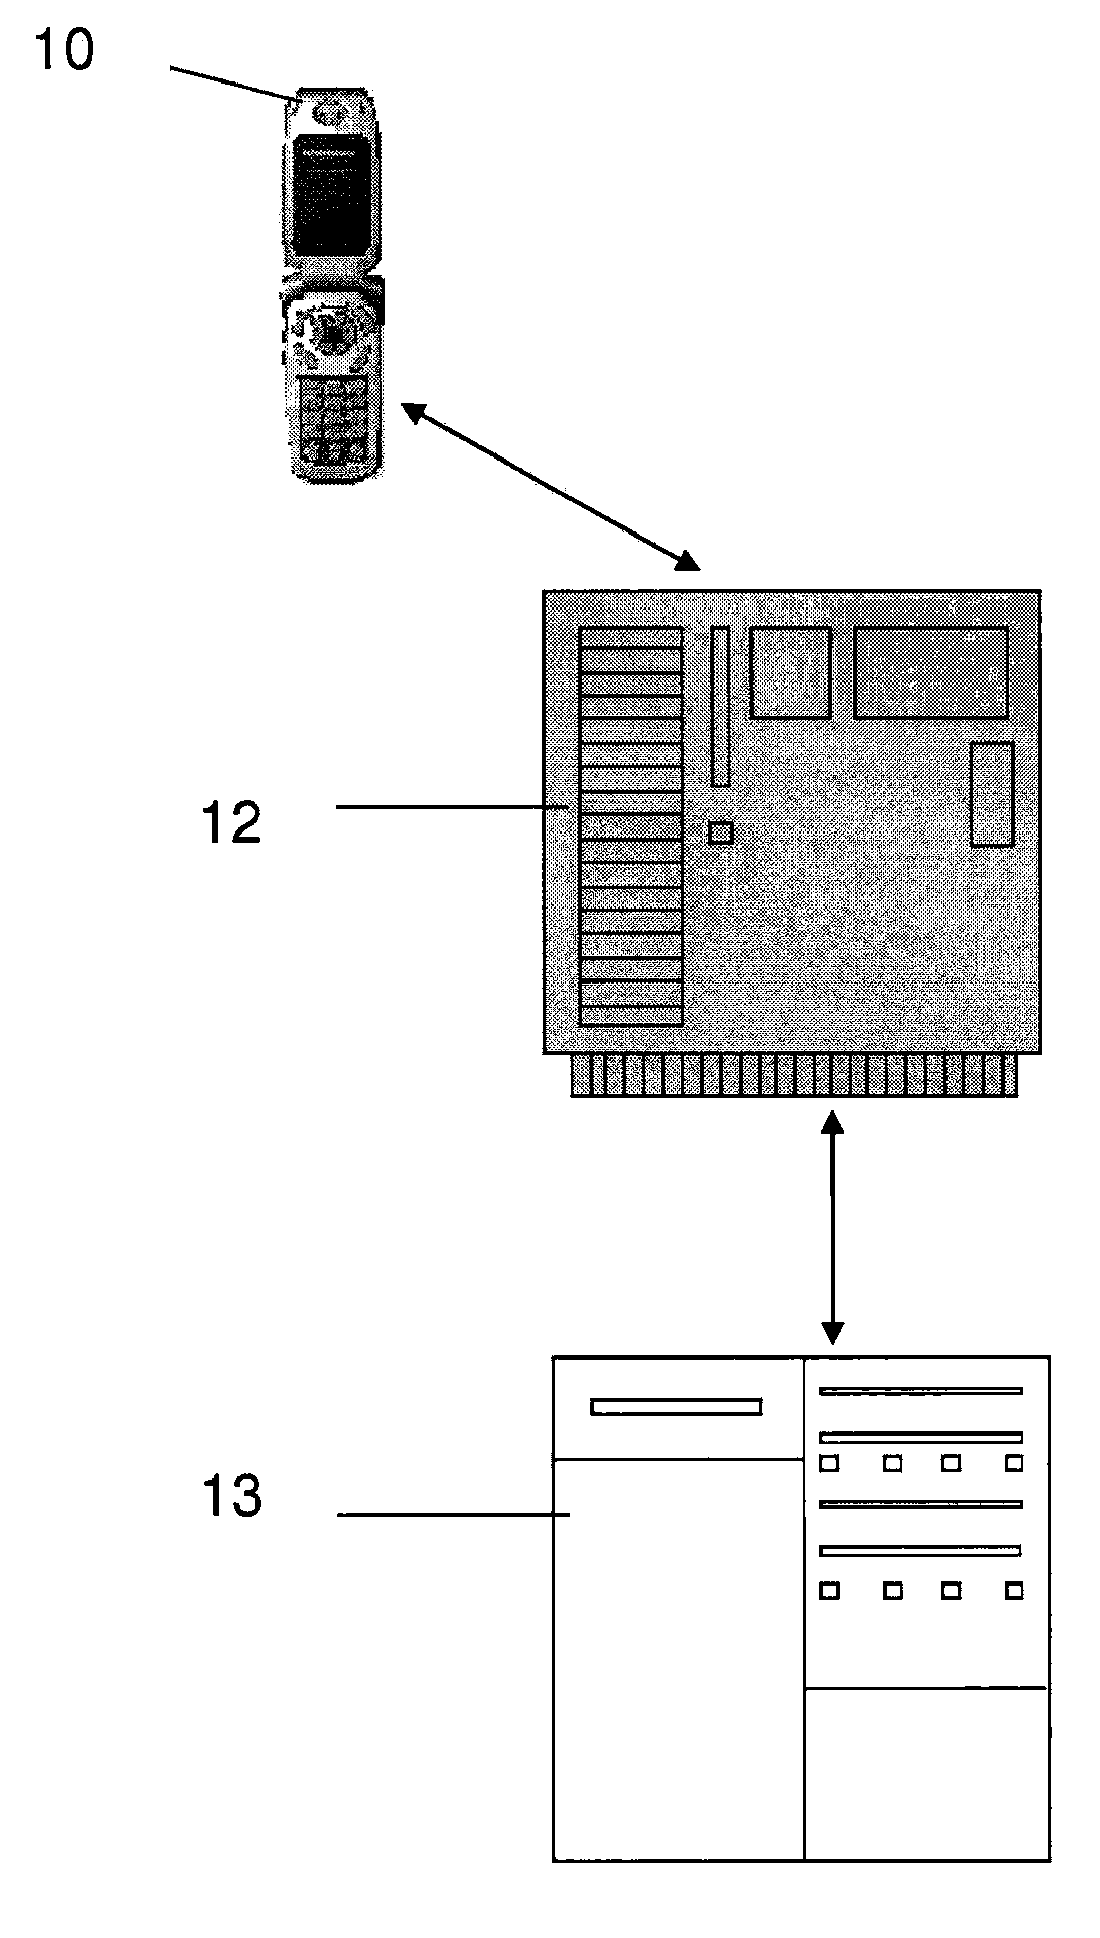 System and Method for Conducting Electronic Account Transactions